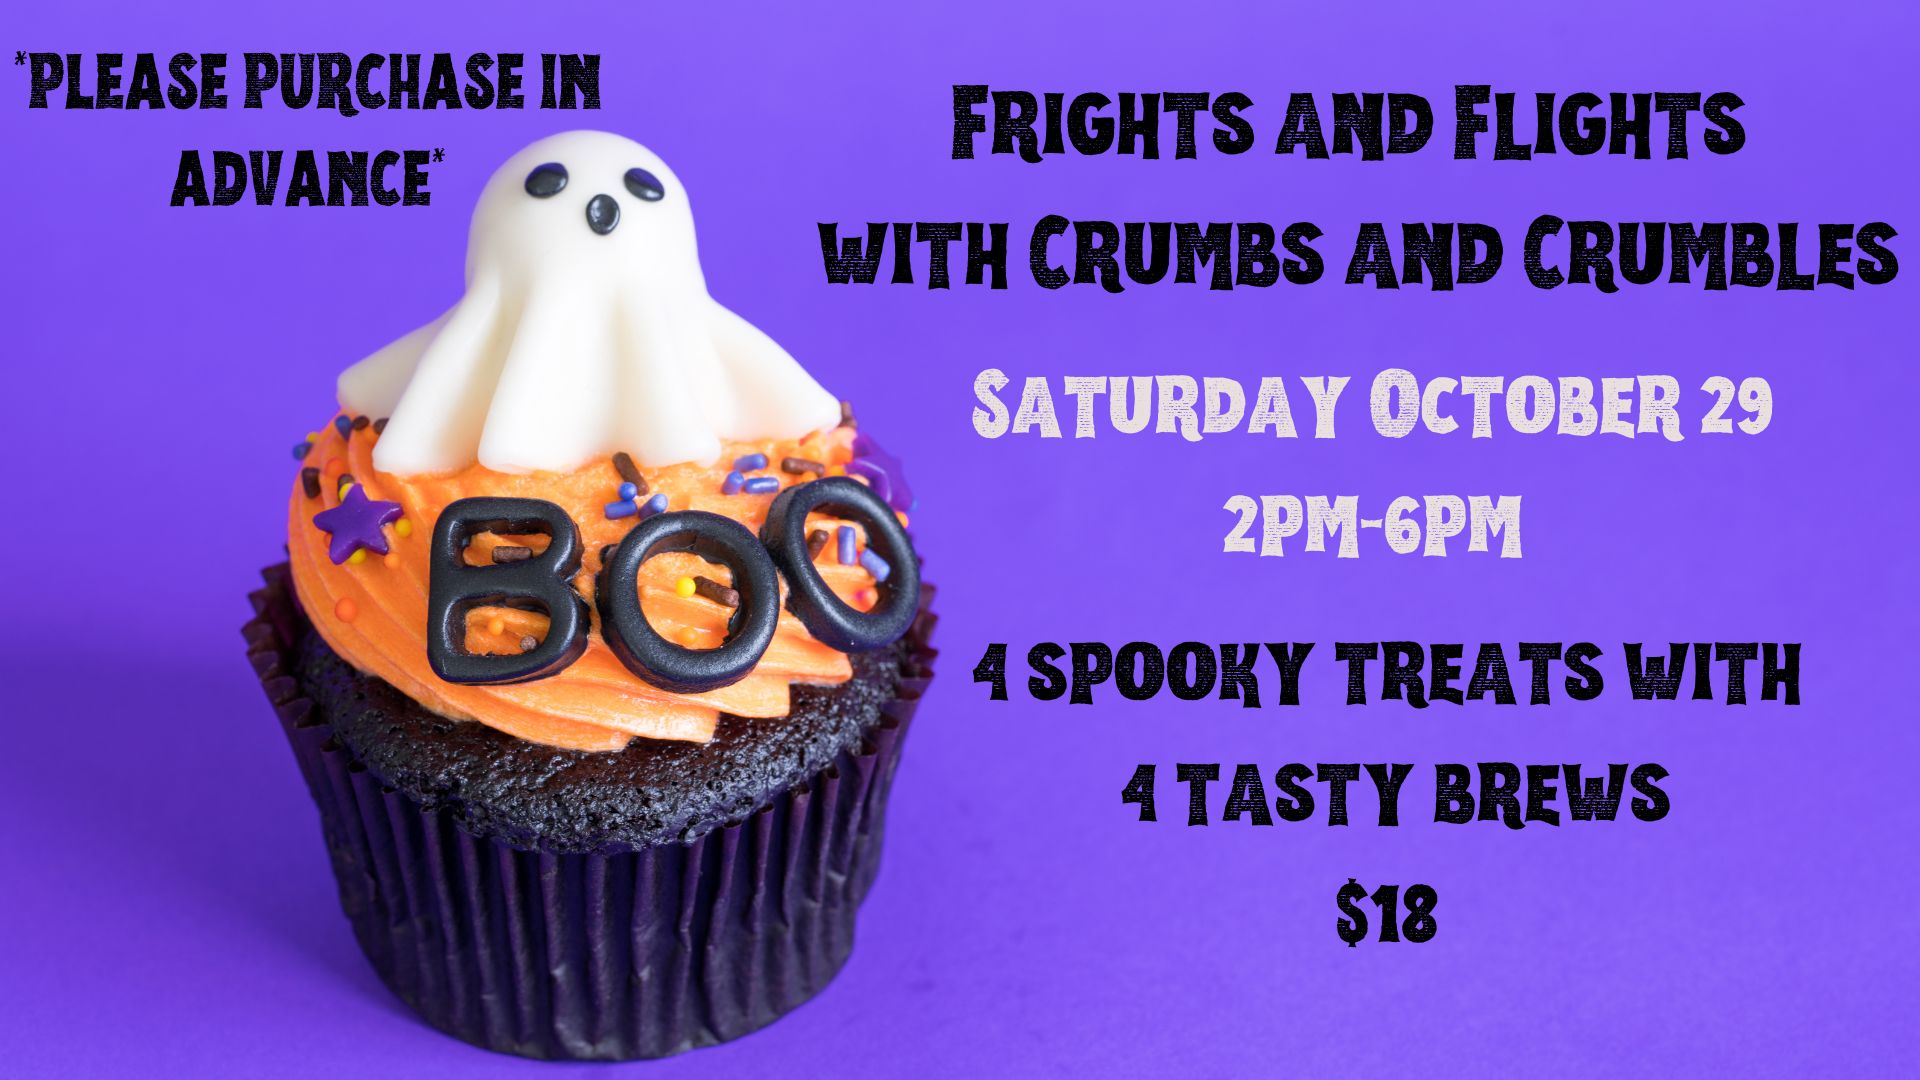 Frights And Flights With Crumbs And Crumbles!